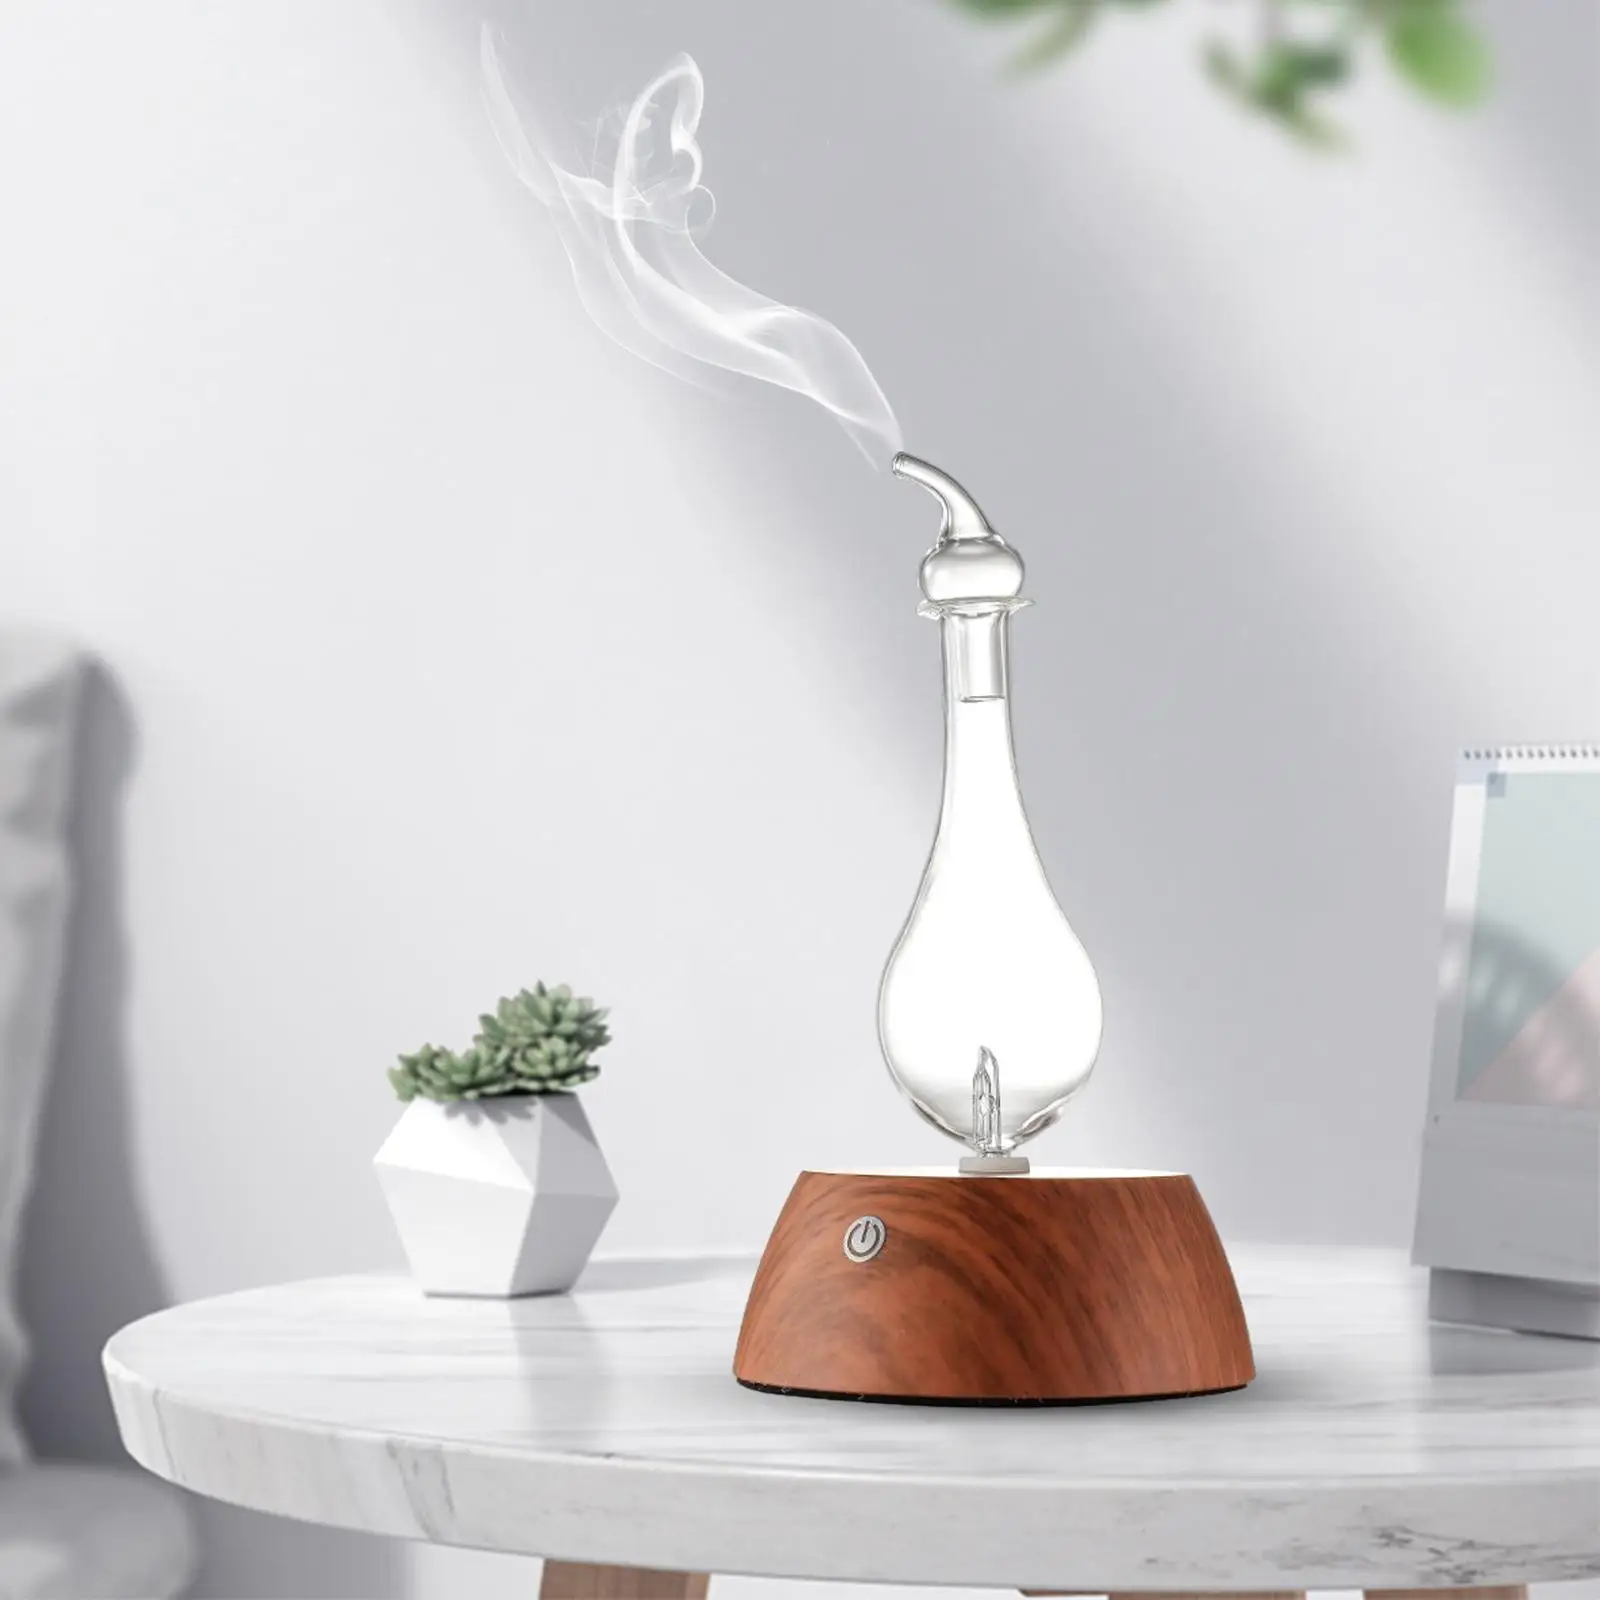 Essential Oil Diffuser Natural Wood Base Auto Shut Off with Night Light Cold Spray Nebulizing Machine Aroma Diffuser for Yoga